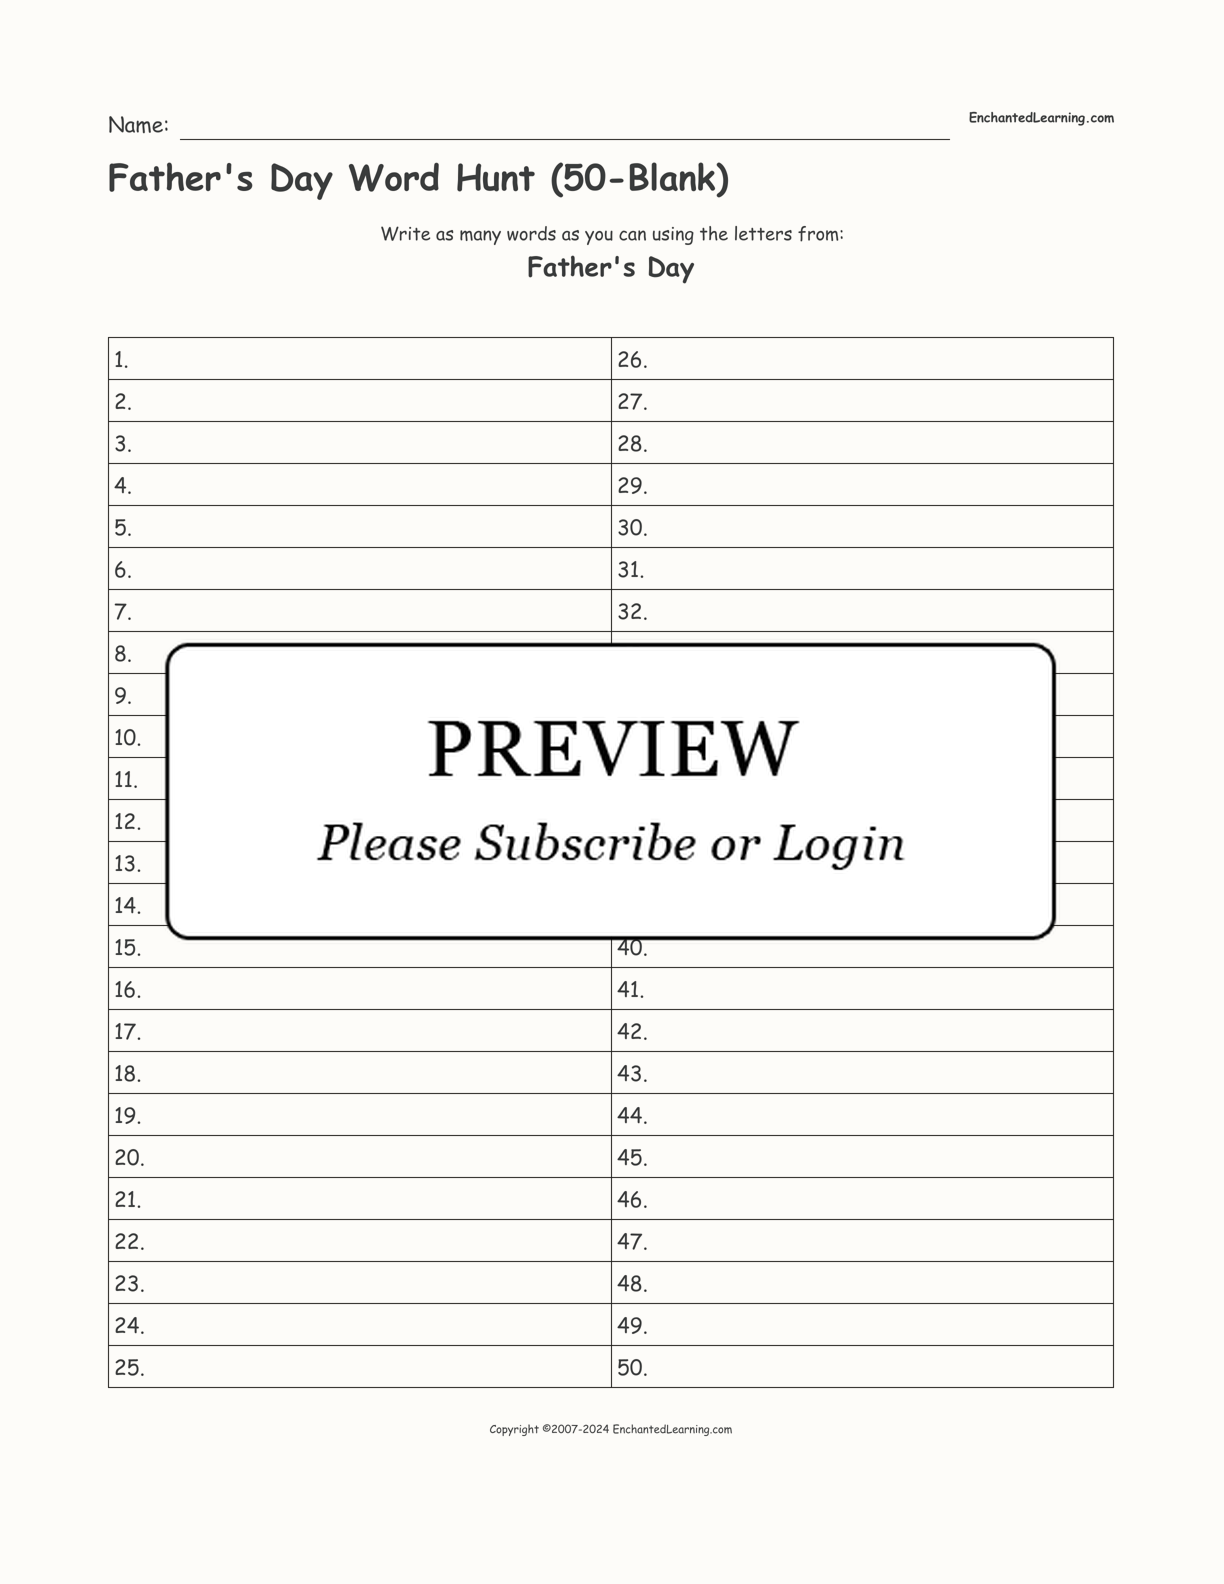 Father's Day Word Hunt (50-Blank) interactive worksheet page 1